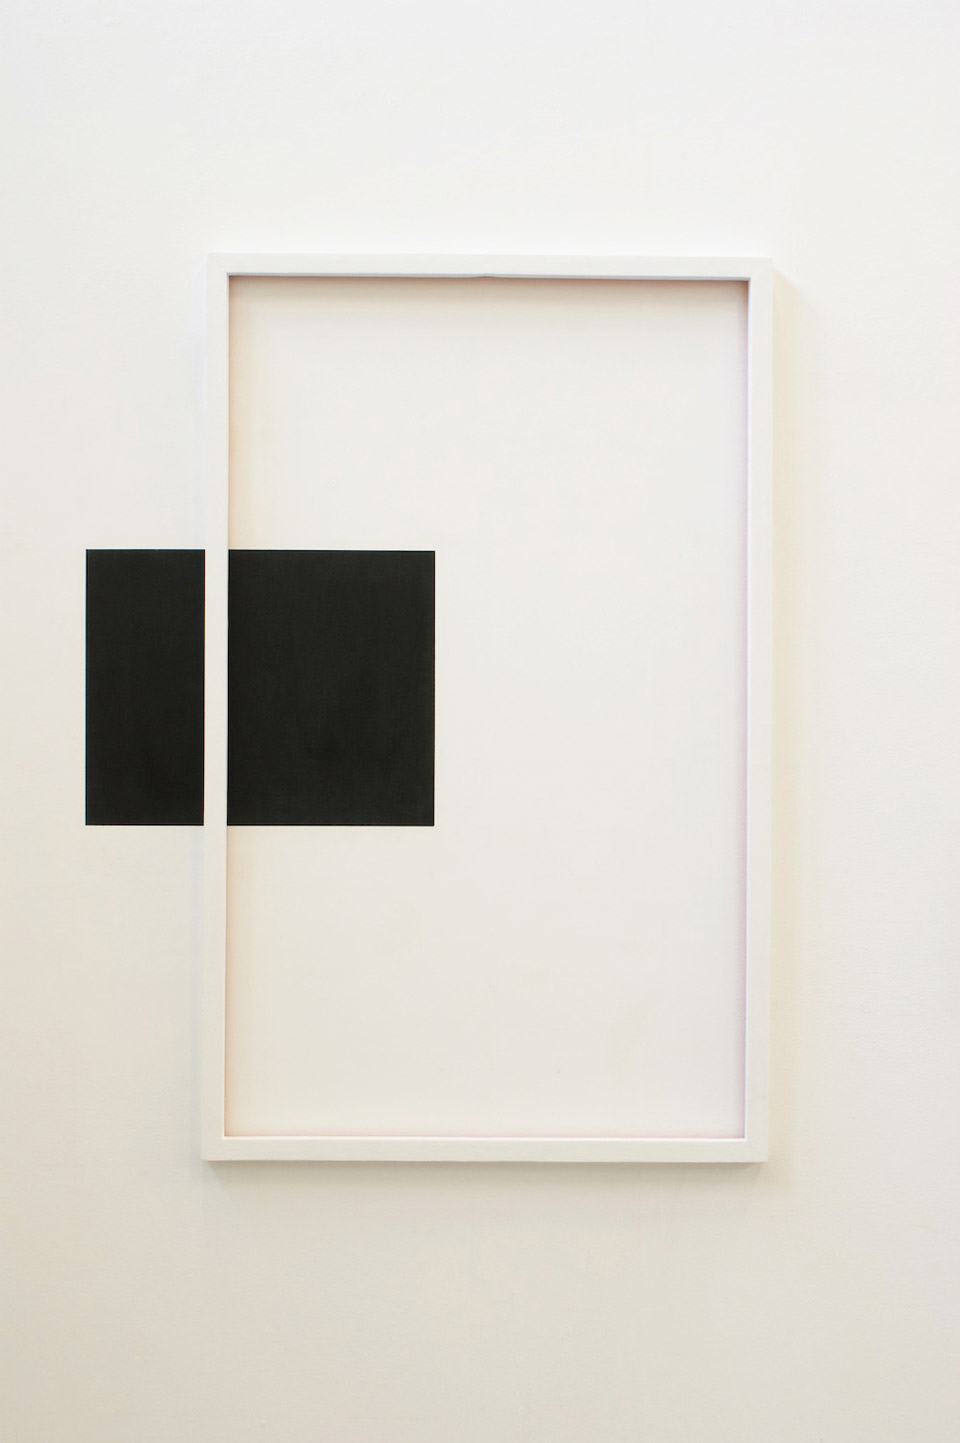 <p>Rectangle-no.1, 2013, acrylic on wall, and acrylic on wooden frame, 120 x 90 x 3 cm<p>
